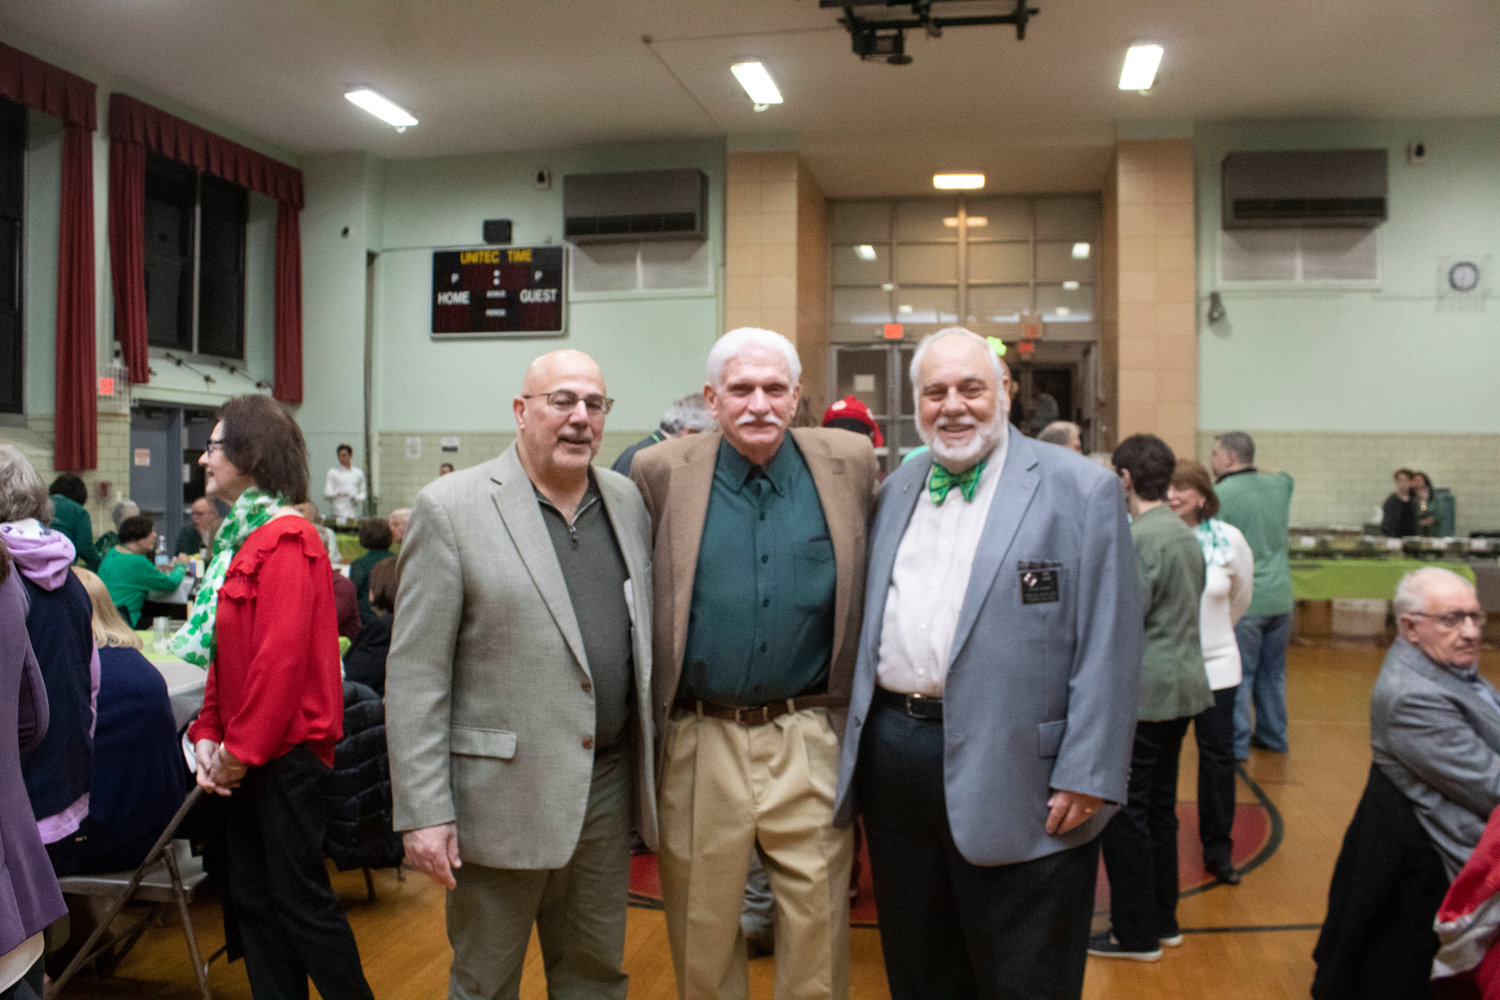 Joe Armocida, left, John Balestrieri and Ray Diaz organized the event held in St. Catherine of Sienna’s gymnasium where hundreds gathered to celebrate St. Patrick’s Day and the Italian tradition of the Feast of Saint Joseph.